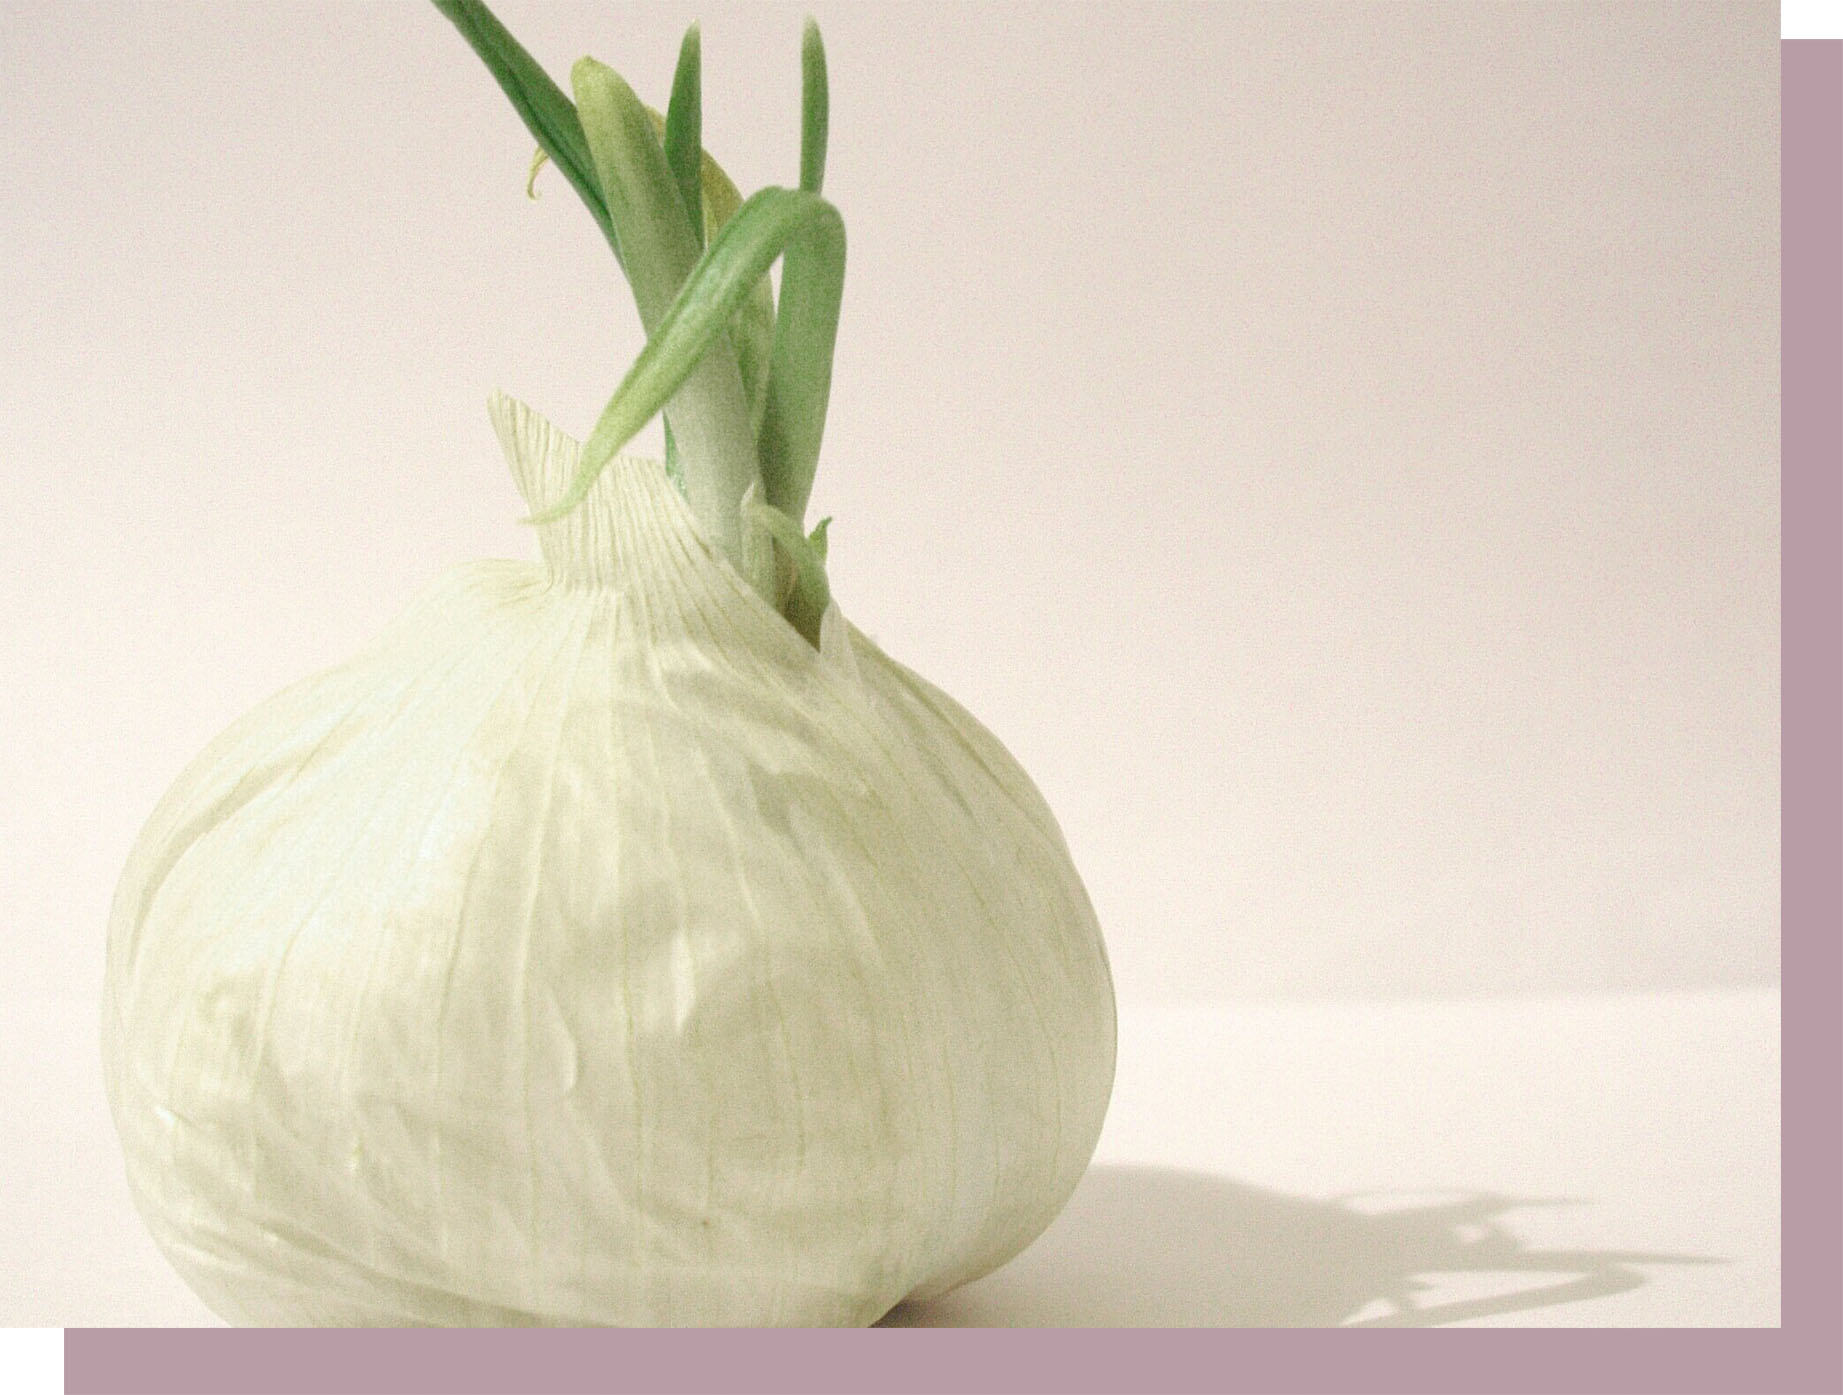 About zick farm - image of home grown garlic